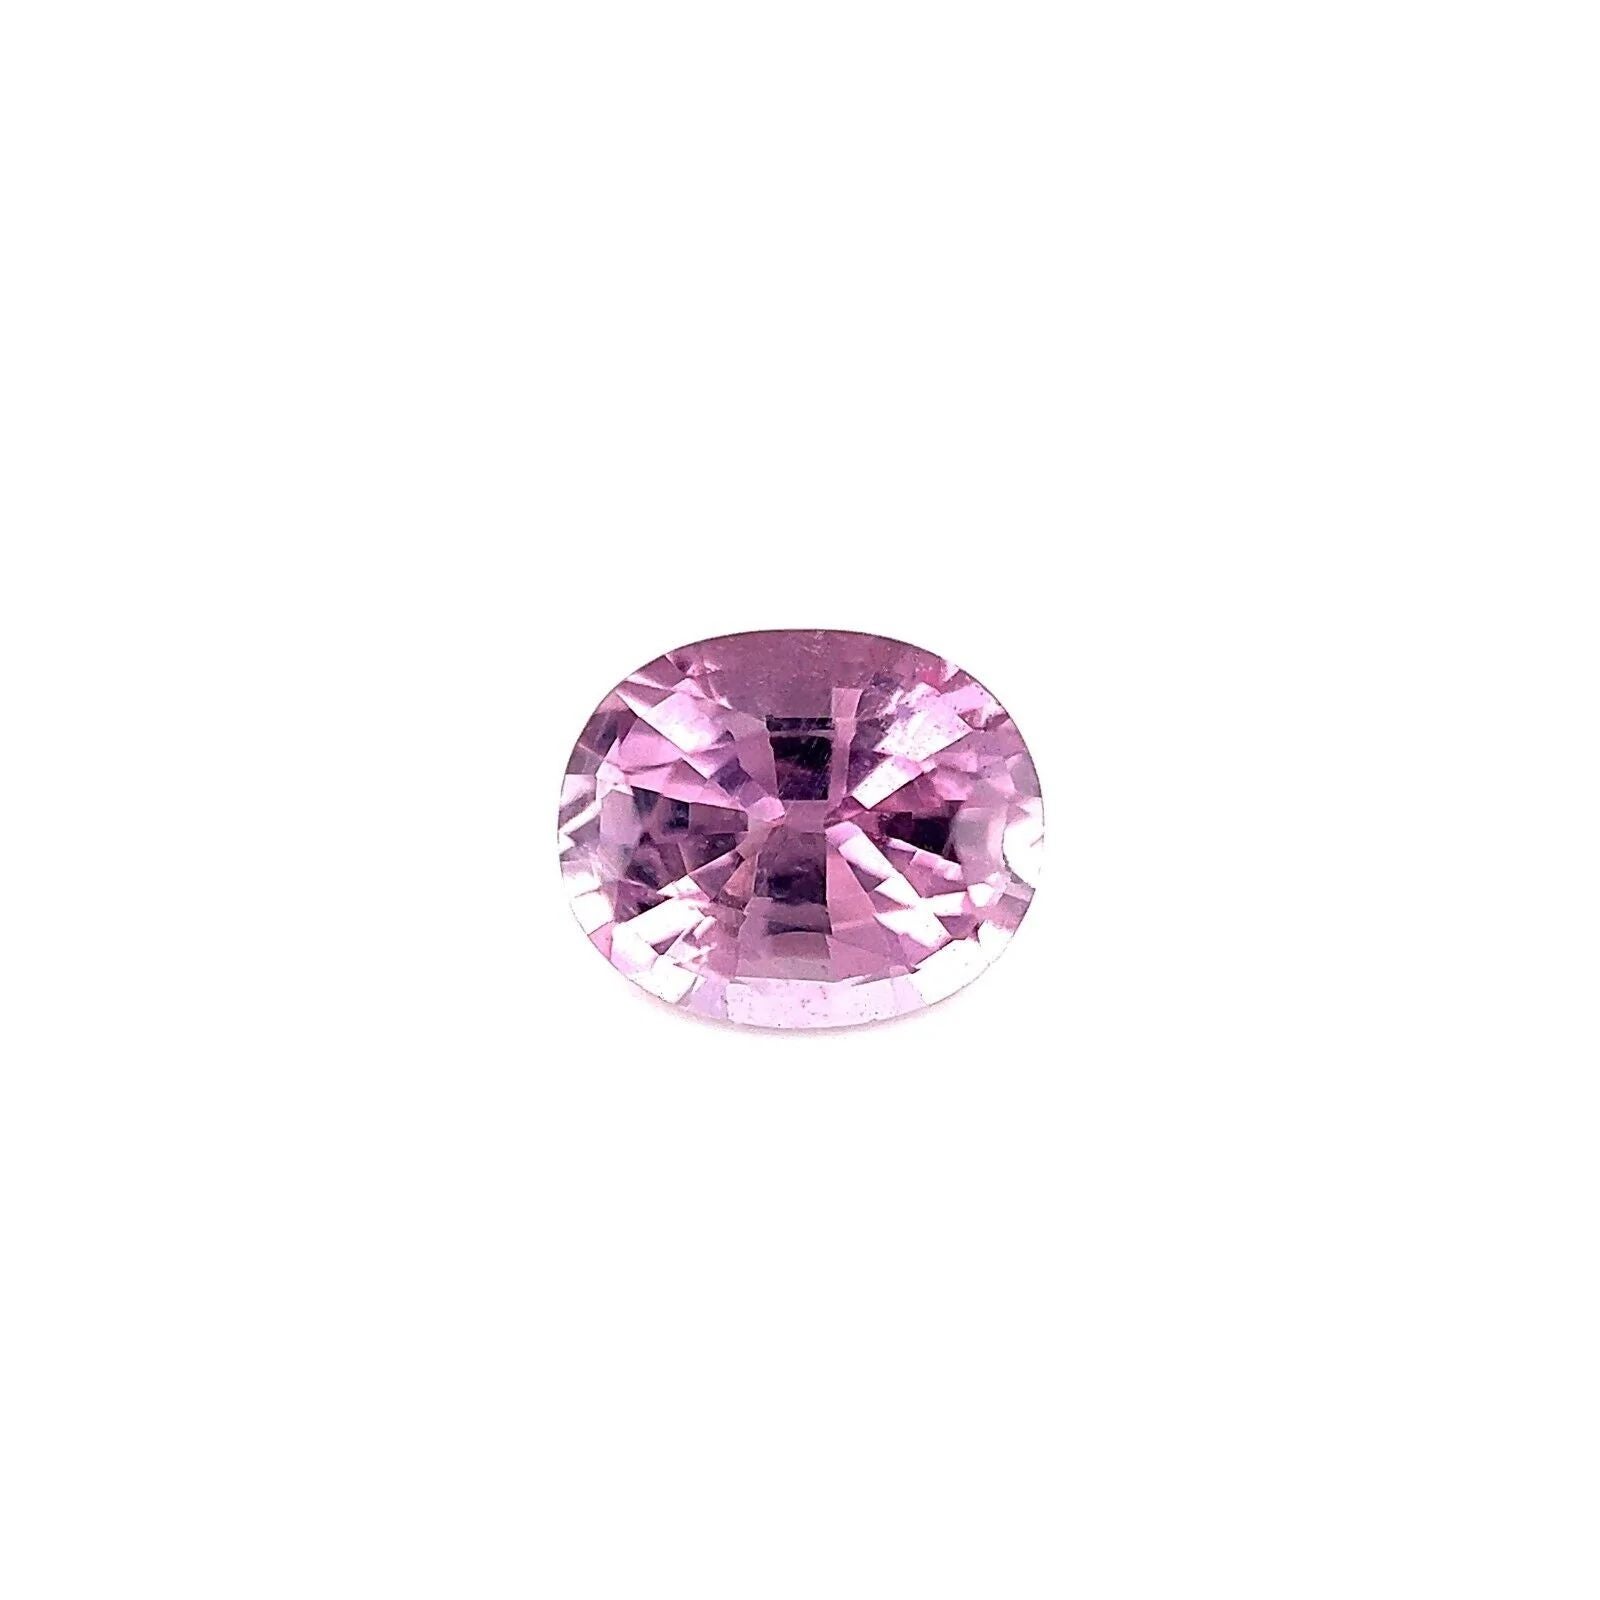 1.15ct Fine Pinkish Purple Spinel Natural Oval Cut Loose Gemstone For Sale